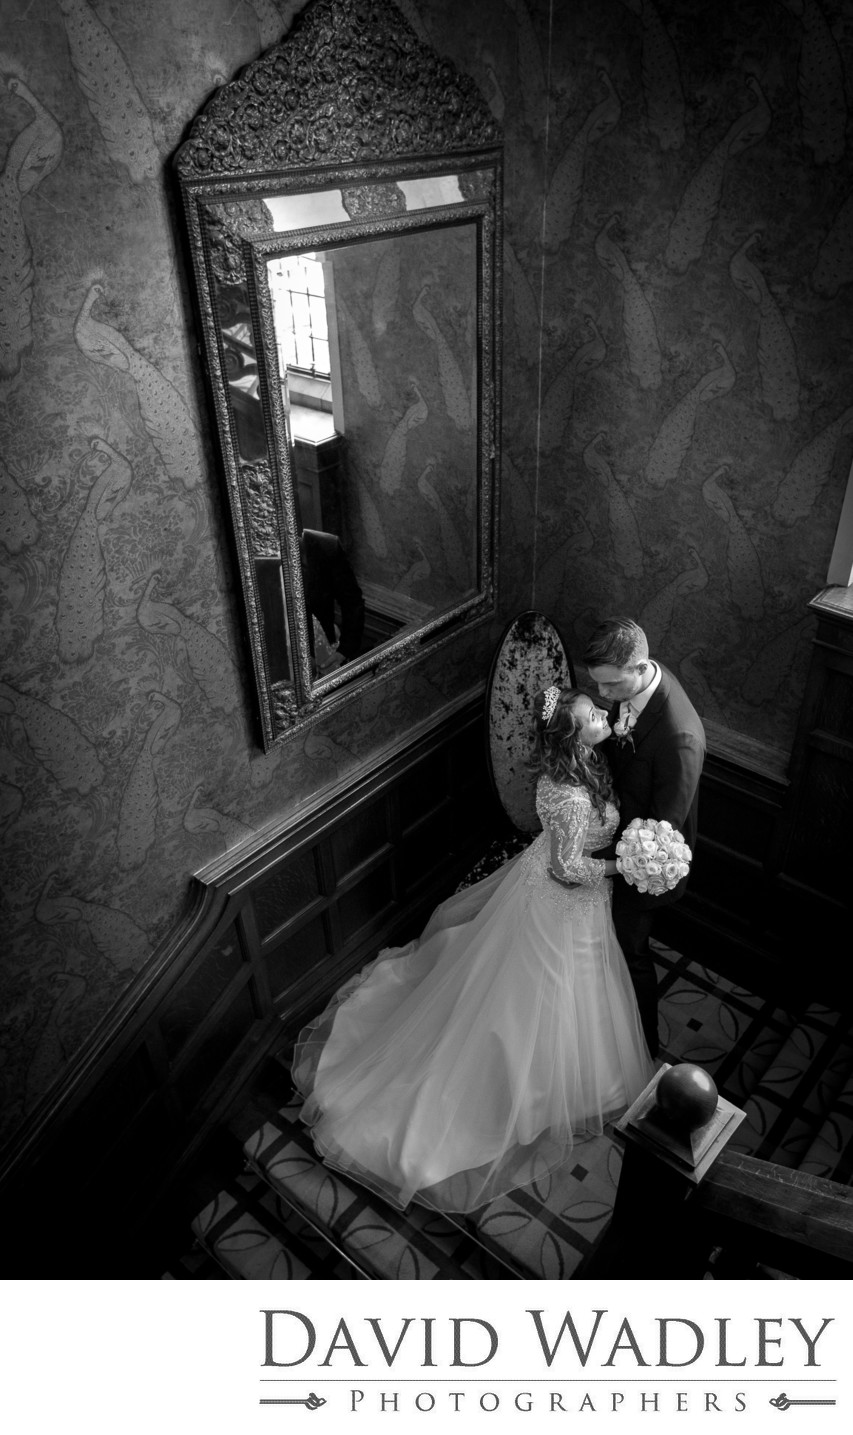 Best Wedding Photos at Moxhull Hotel Sutton Coldfield